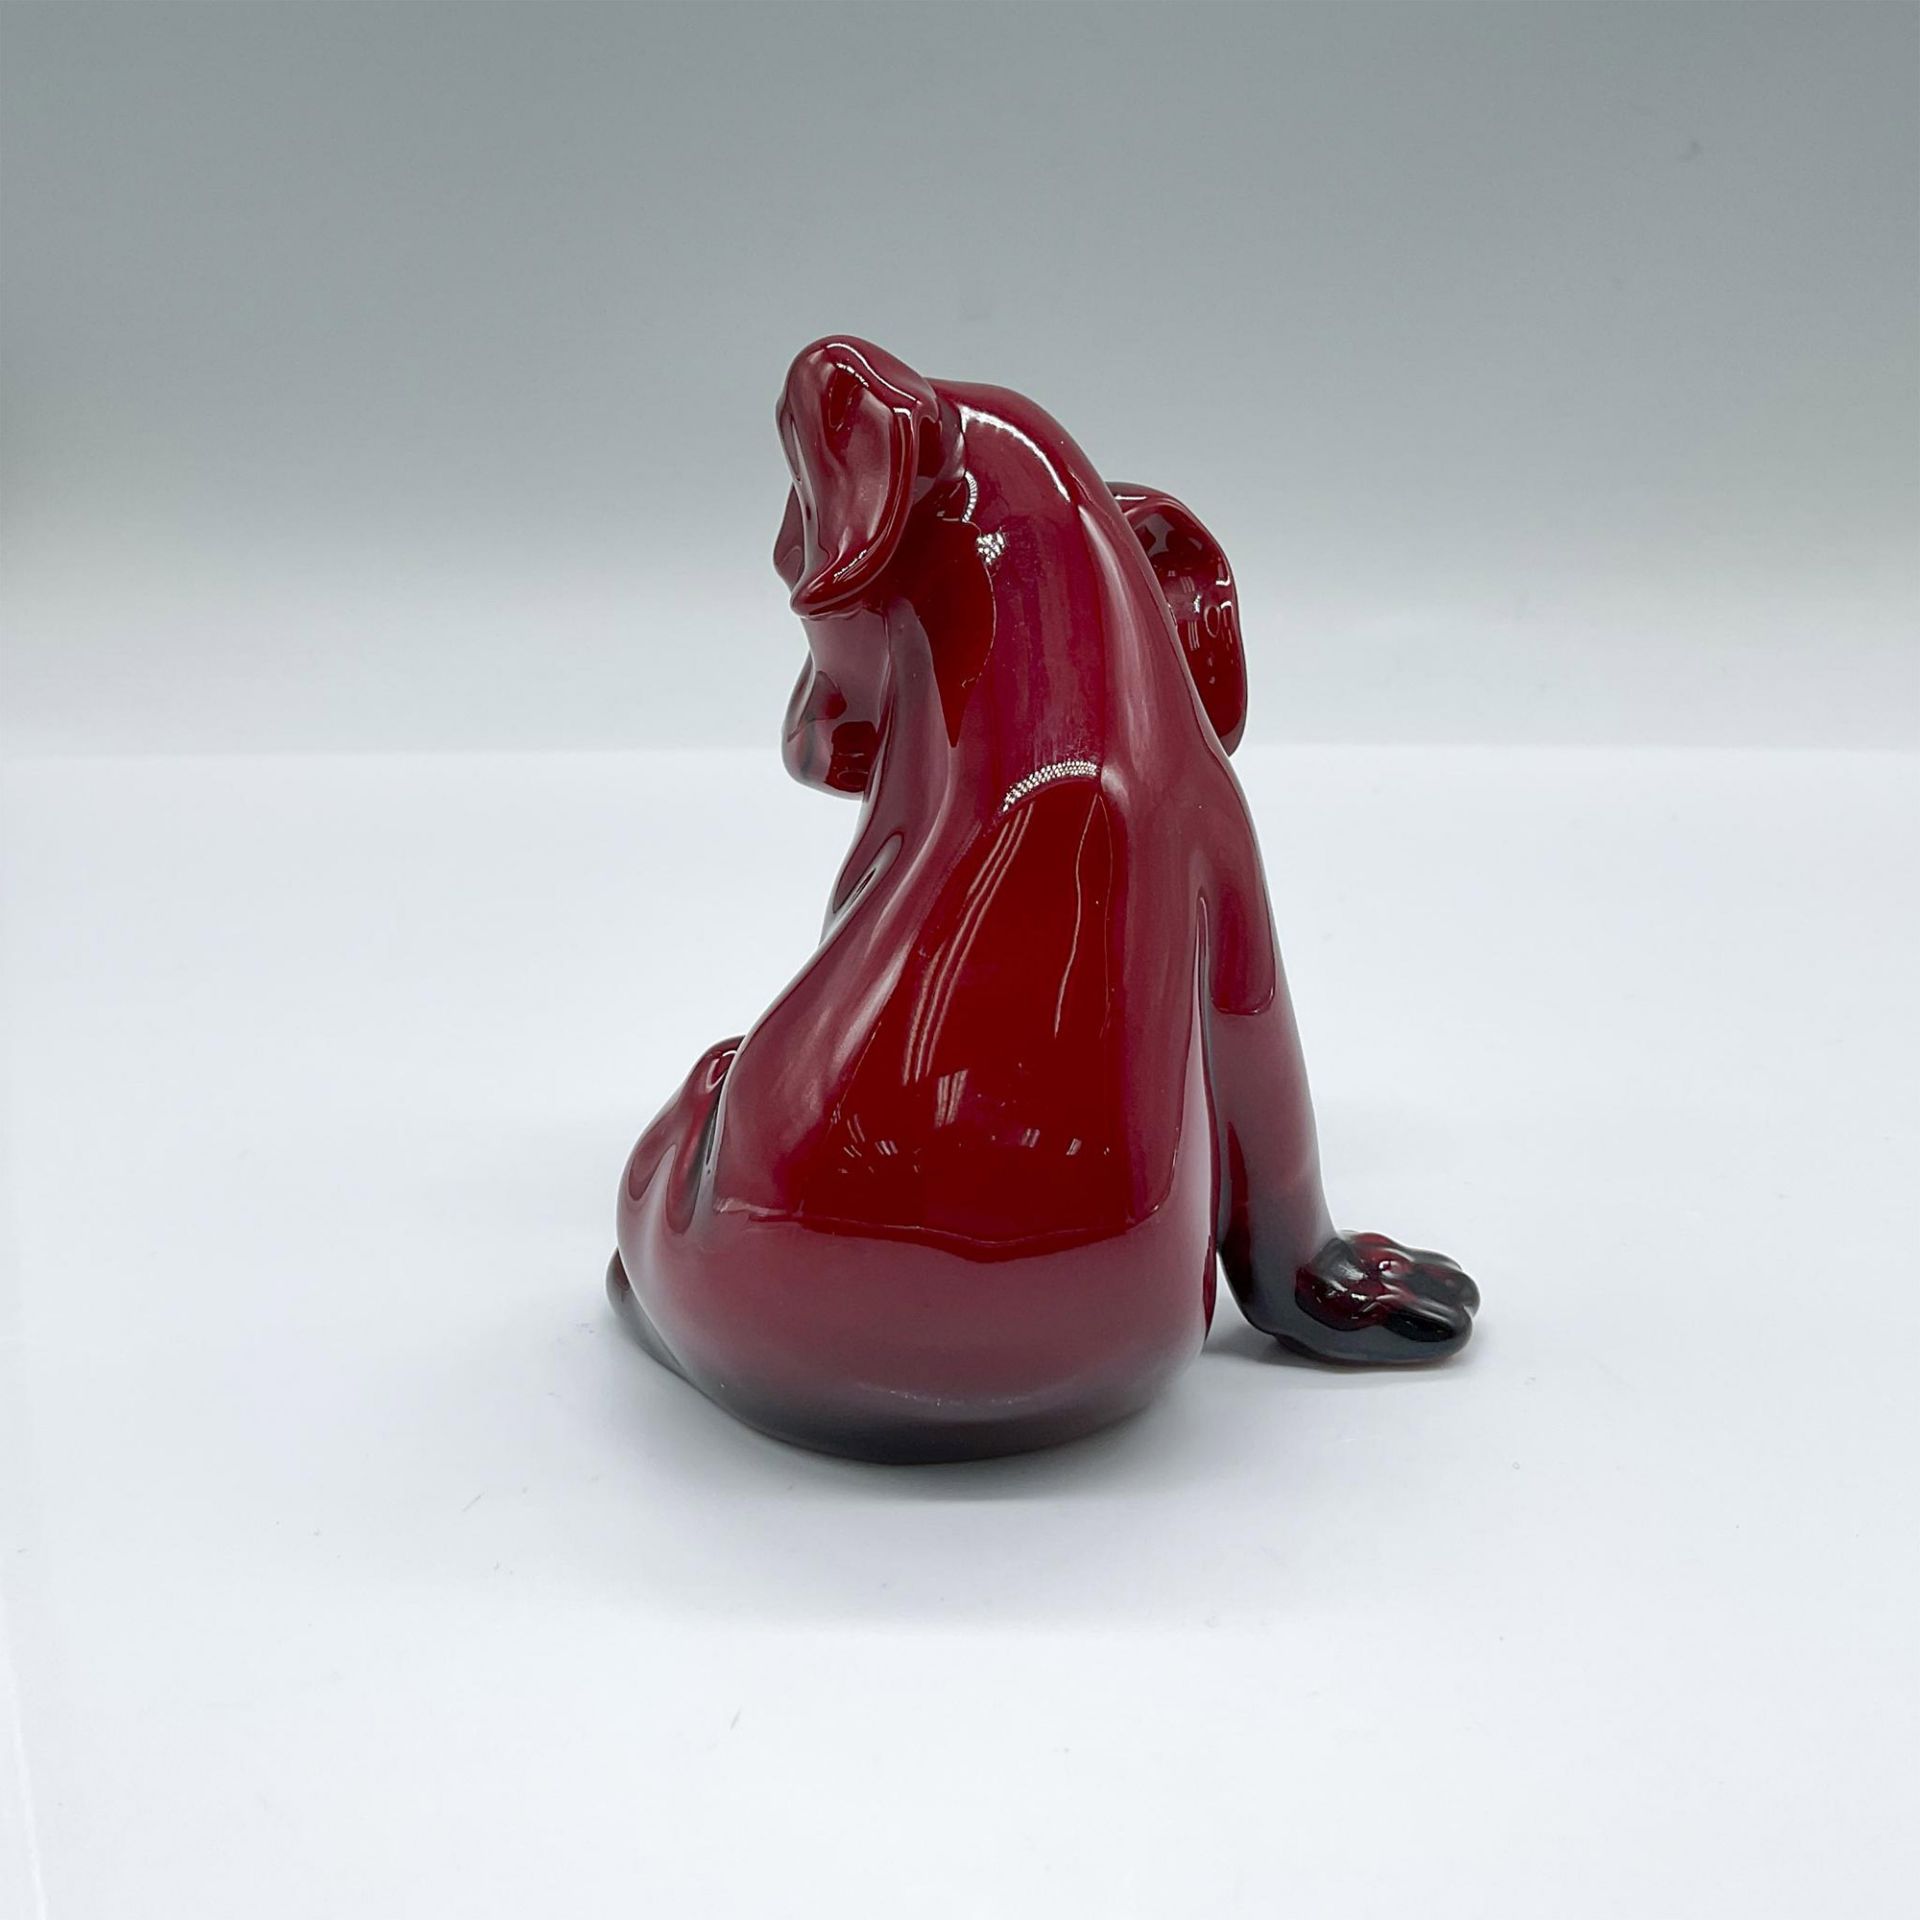 Royal Doulton Flambe Figurine, Puppy - Seated HN128 - Image 3 of 4